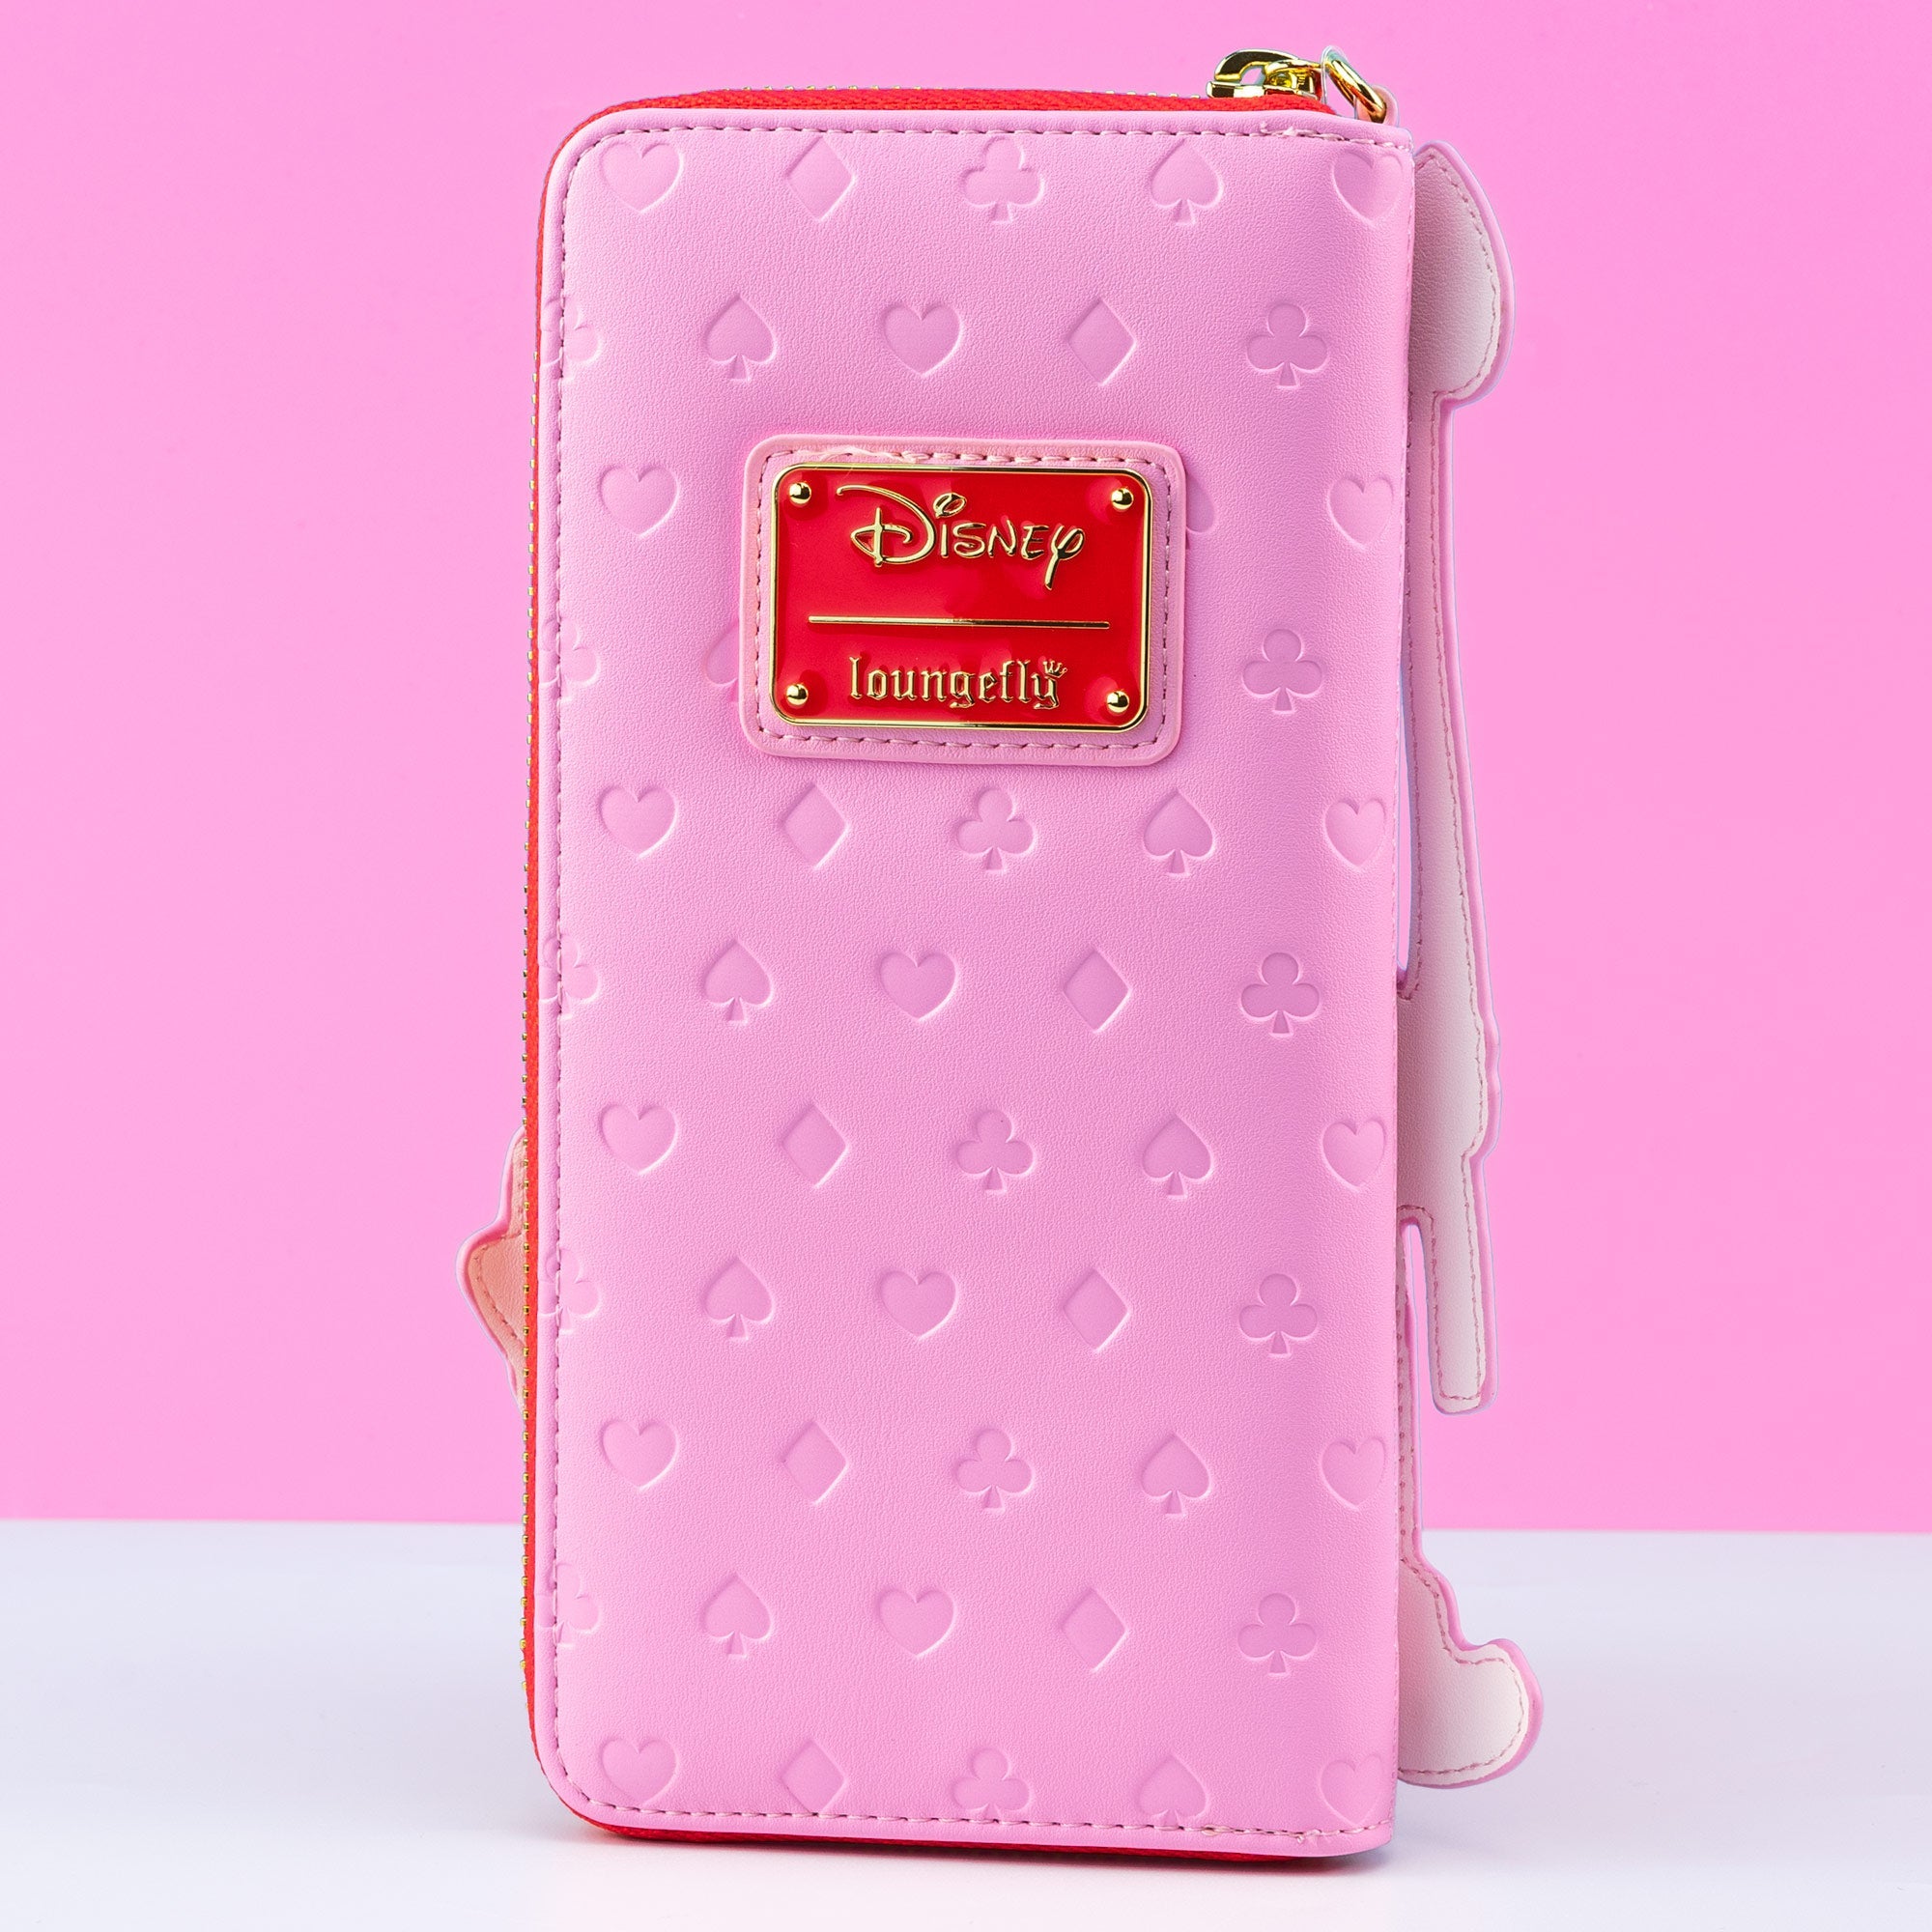 Loungefly x Disney Alice in Wonderland Ace of Hearts Purse - GeekCore